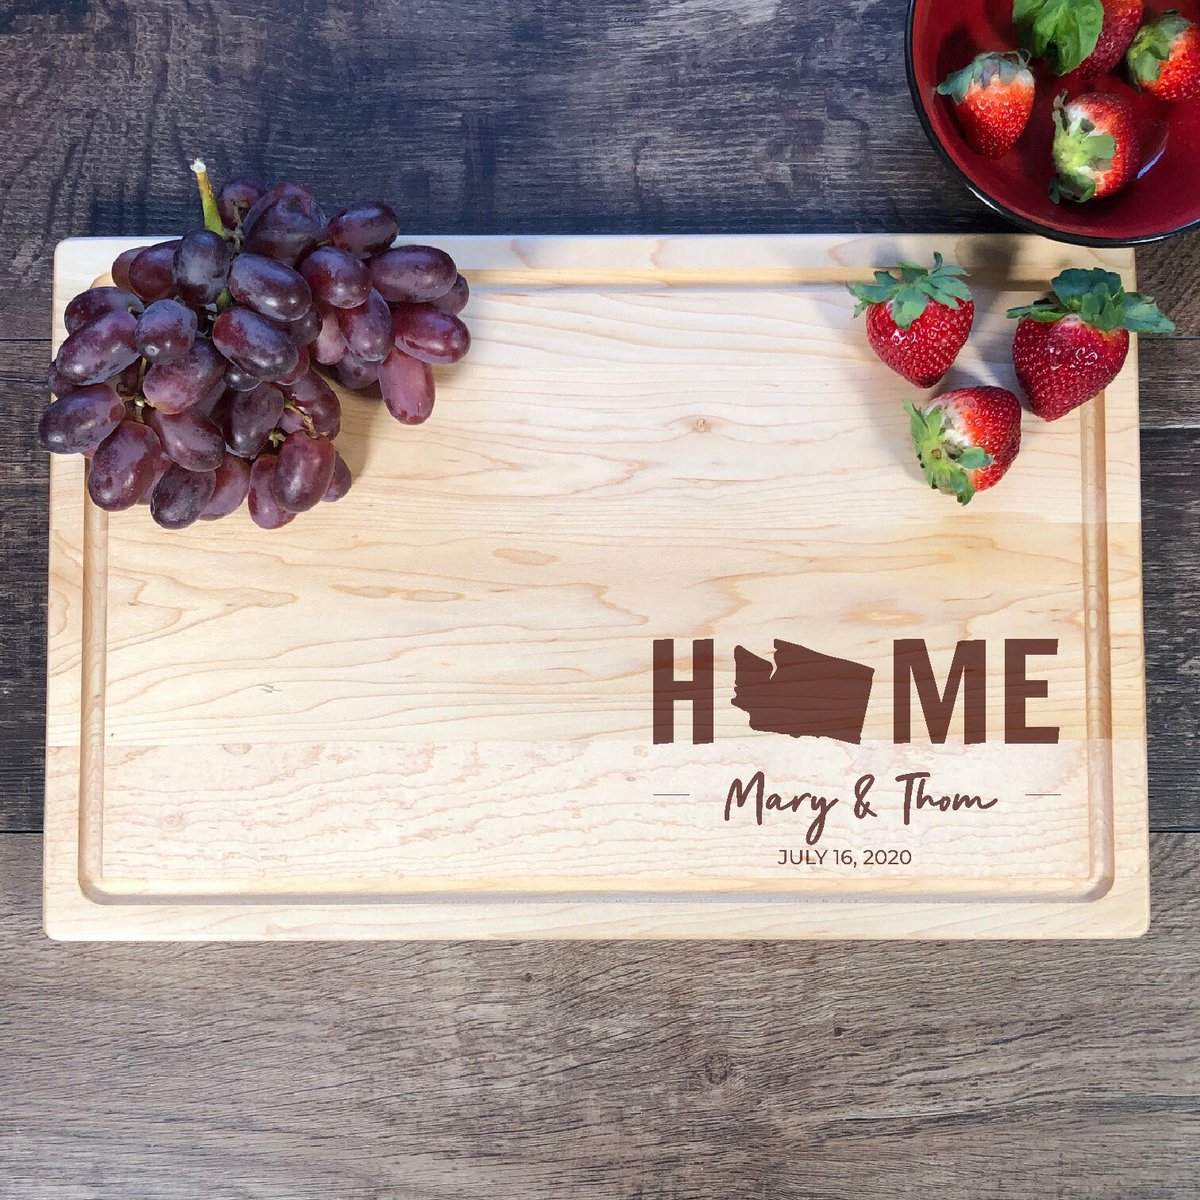 Realtor's Gift. Thanks for the kind words! ★★★★★ 'My clients literally loveddd this gift! I highly recommend!' Yulie etsy.me/3JFPQQV #etsy #housewarming #wood #cuttingboard #housewarminggift #closinggift #realtorgift #newhome #marketing #giftfromrealtor